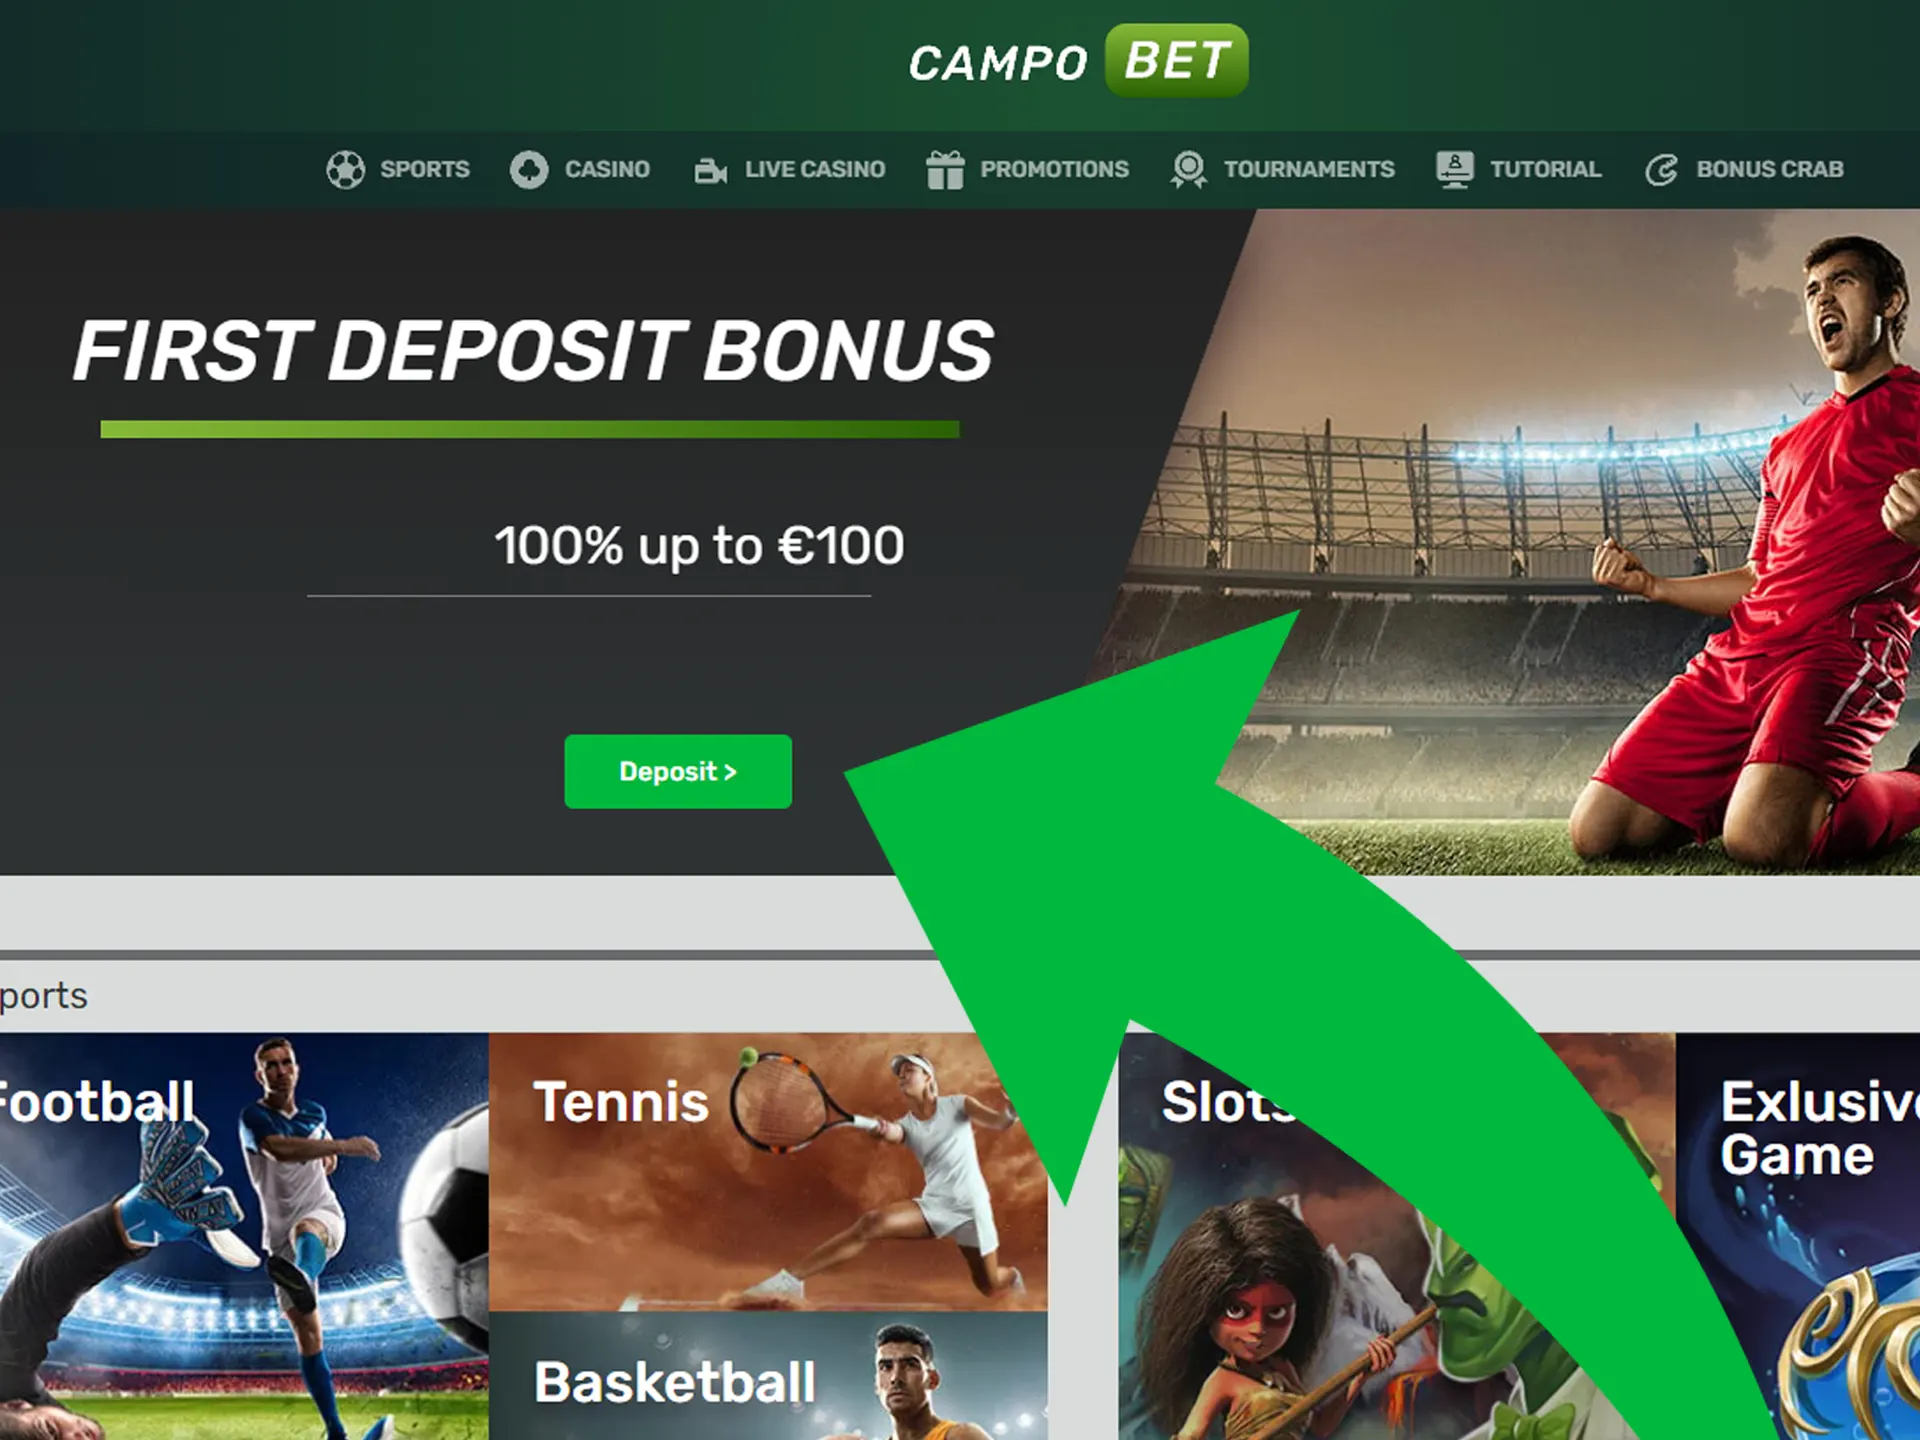 Click on deposit button.